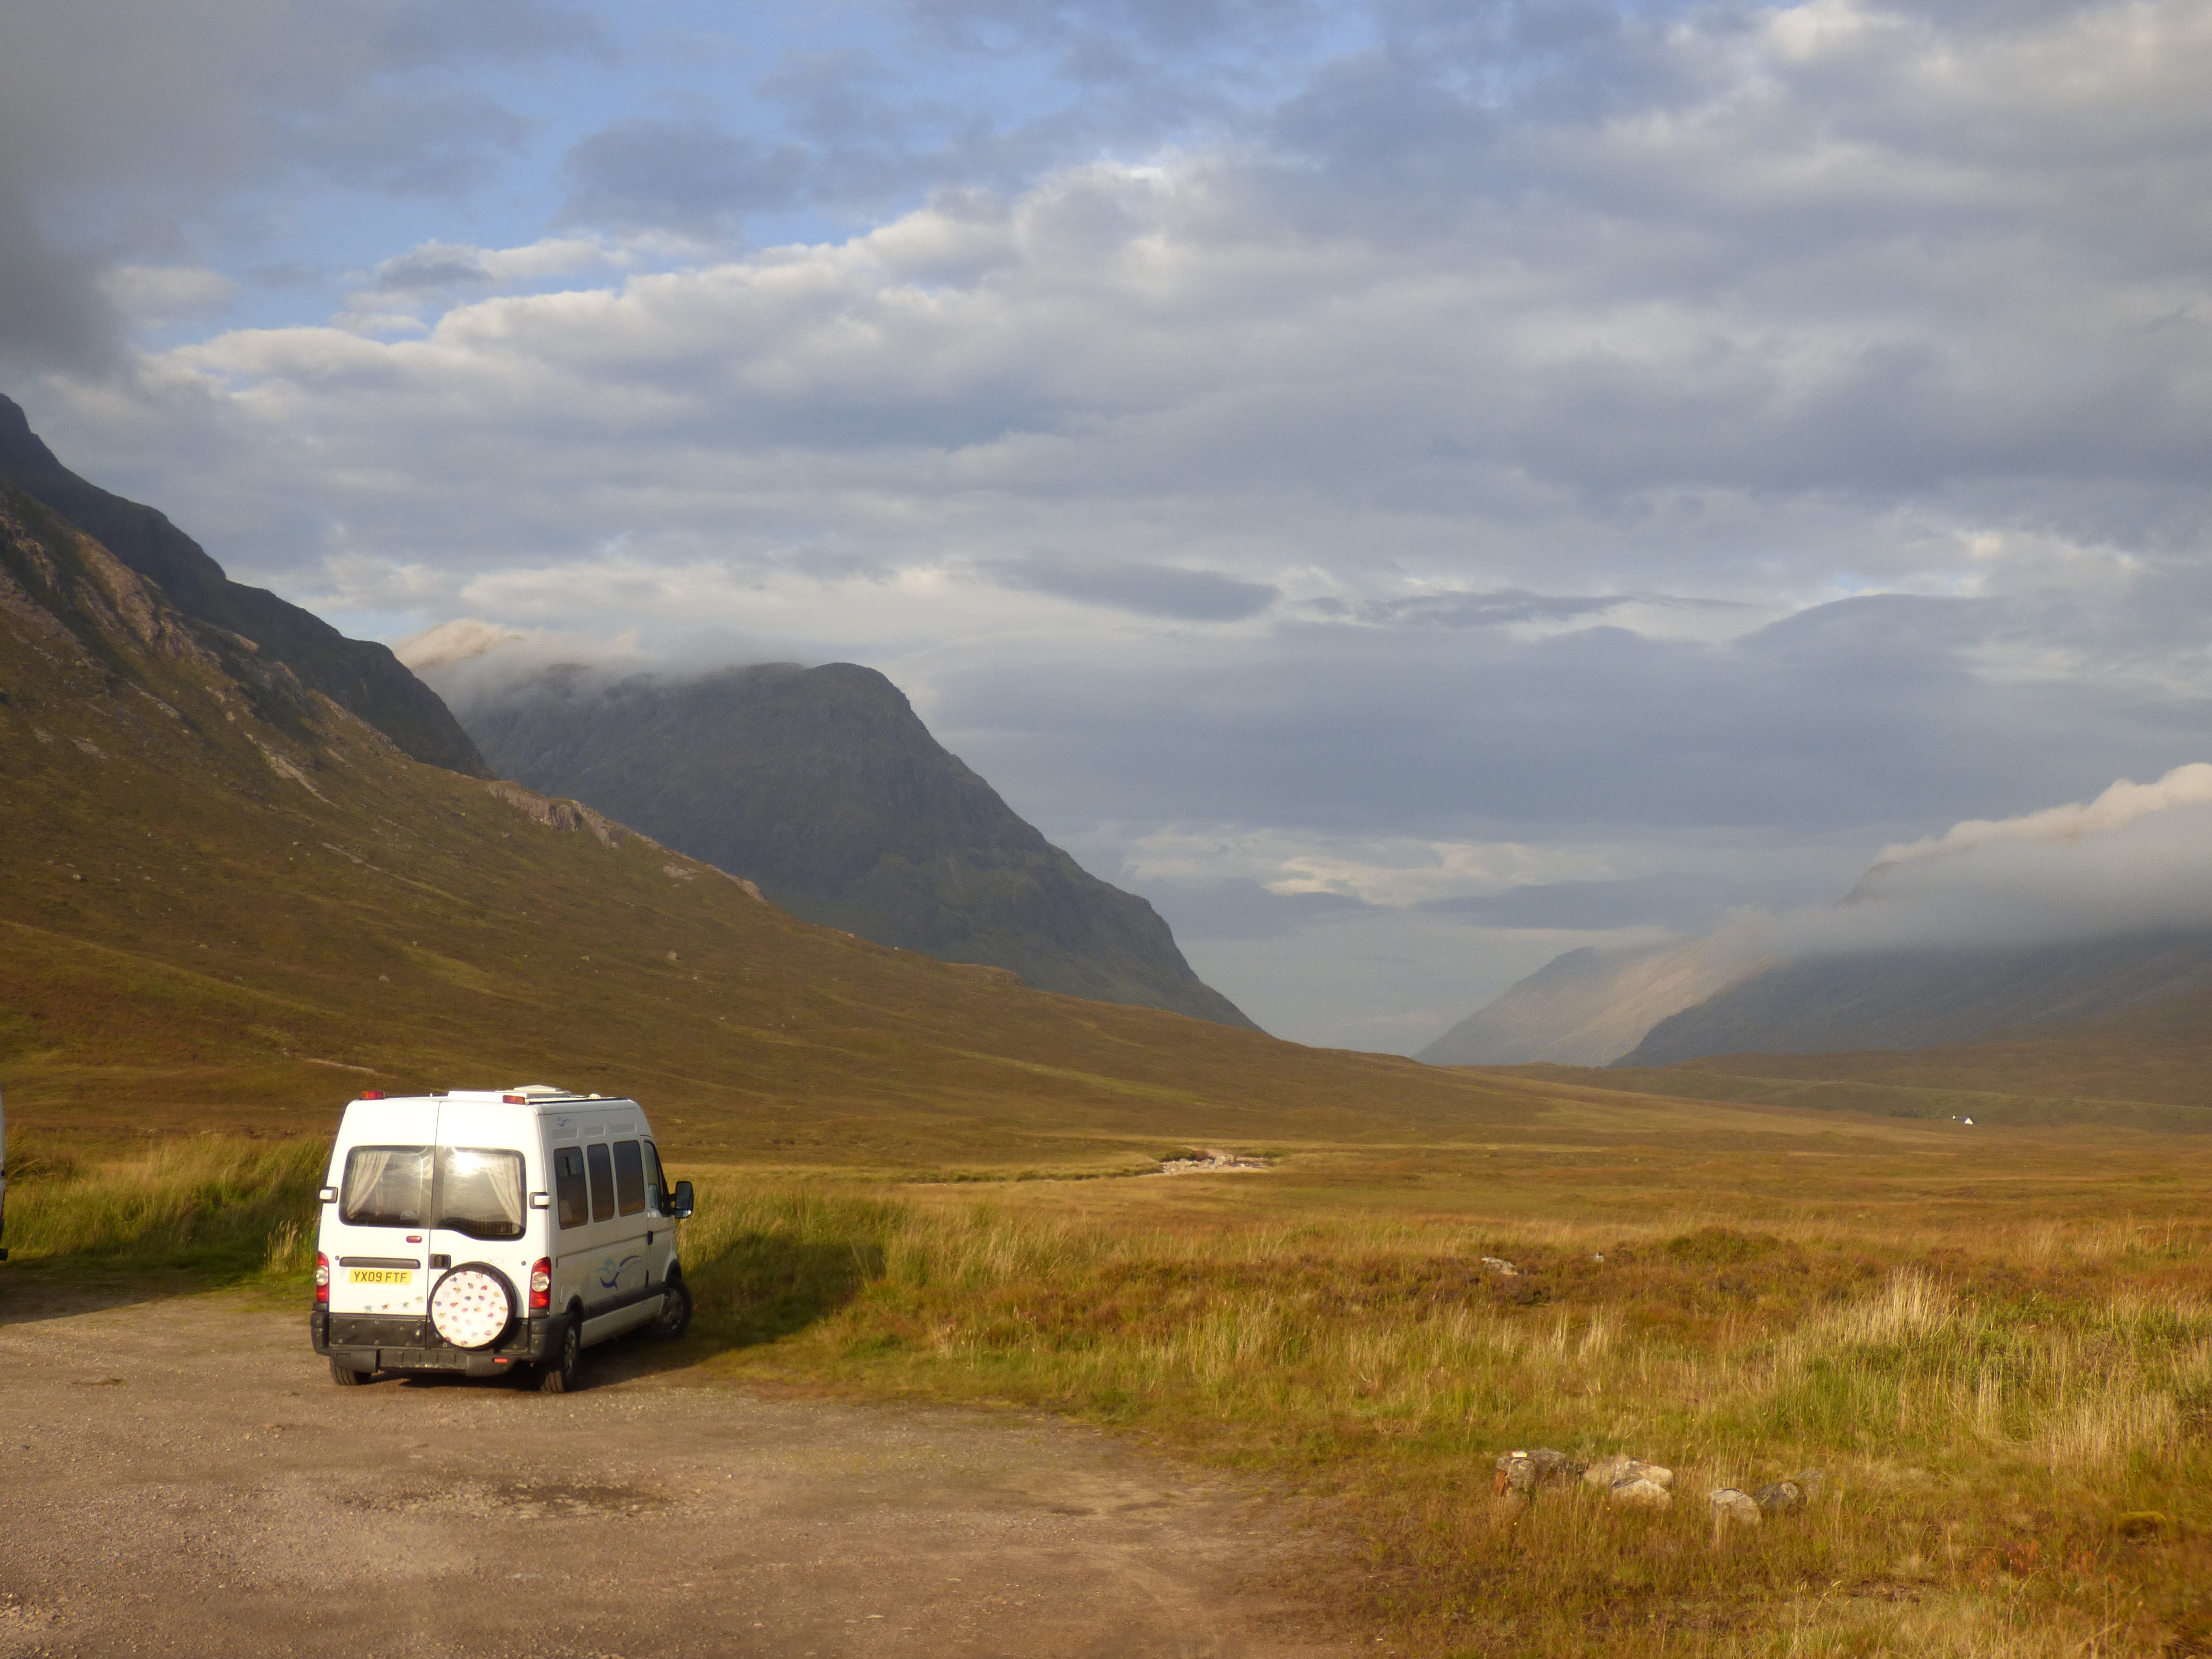 Van at Glen Coe overnight - Peace personified.